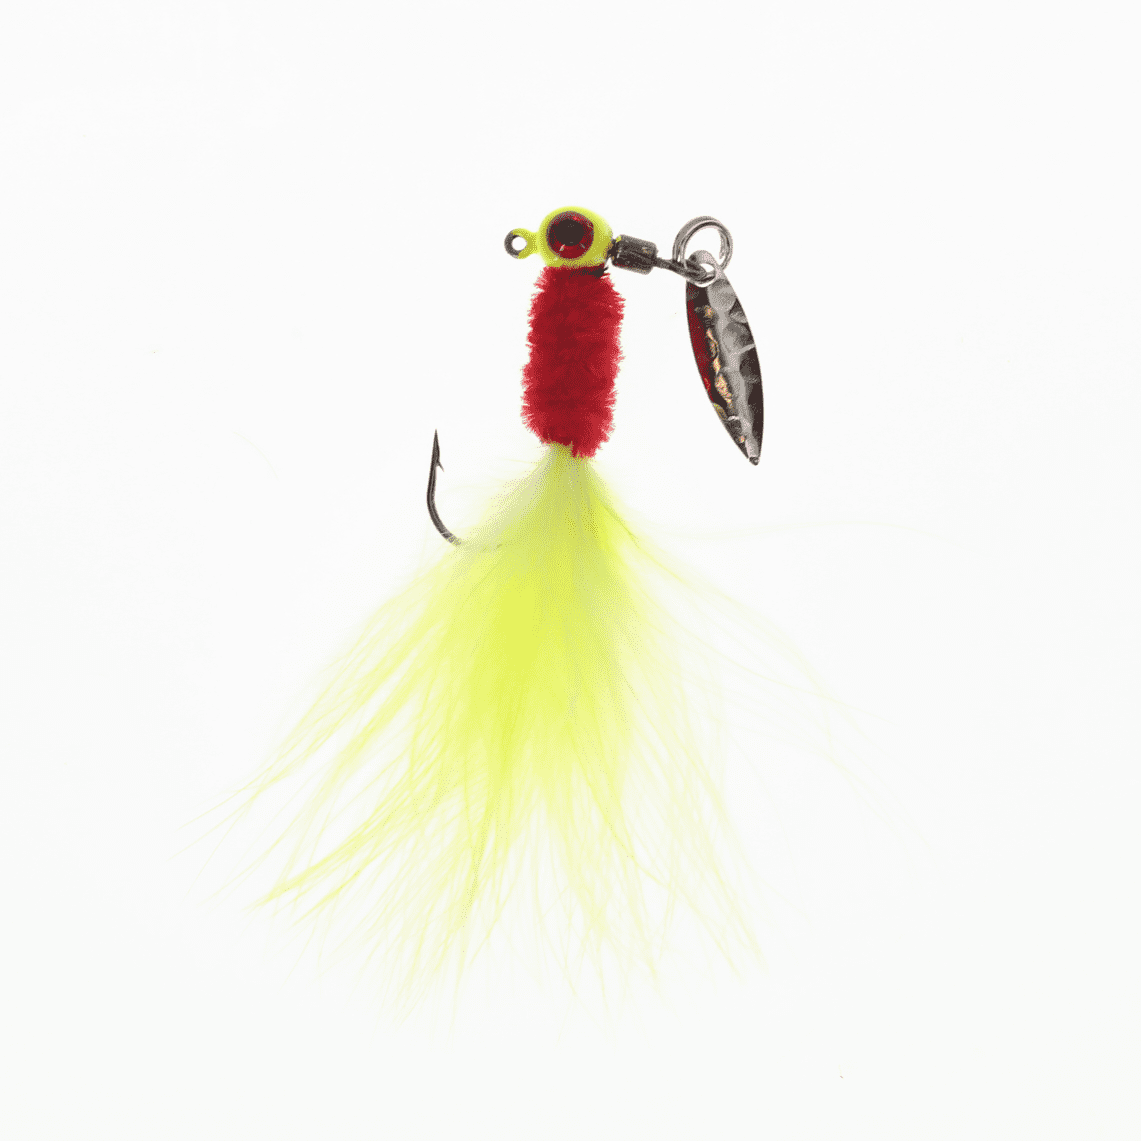 Marabou Sausage Head Spin 1 / 16 oz, Red Rooster Crappie Jig